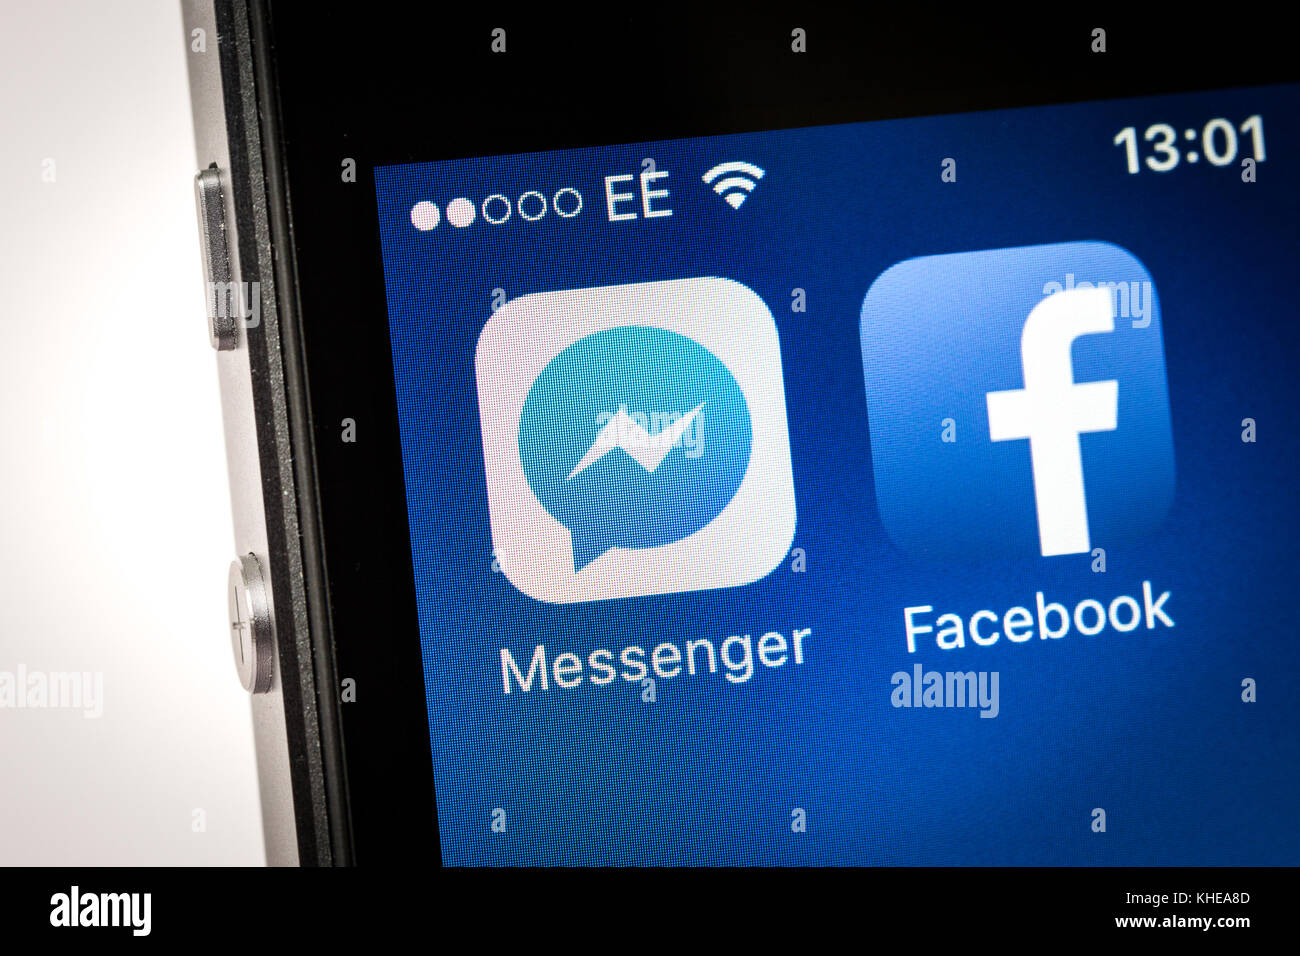 Facebook Messenger and Facebook apps on an iPhone Stock Photo